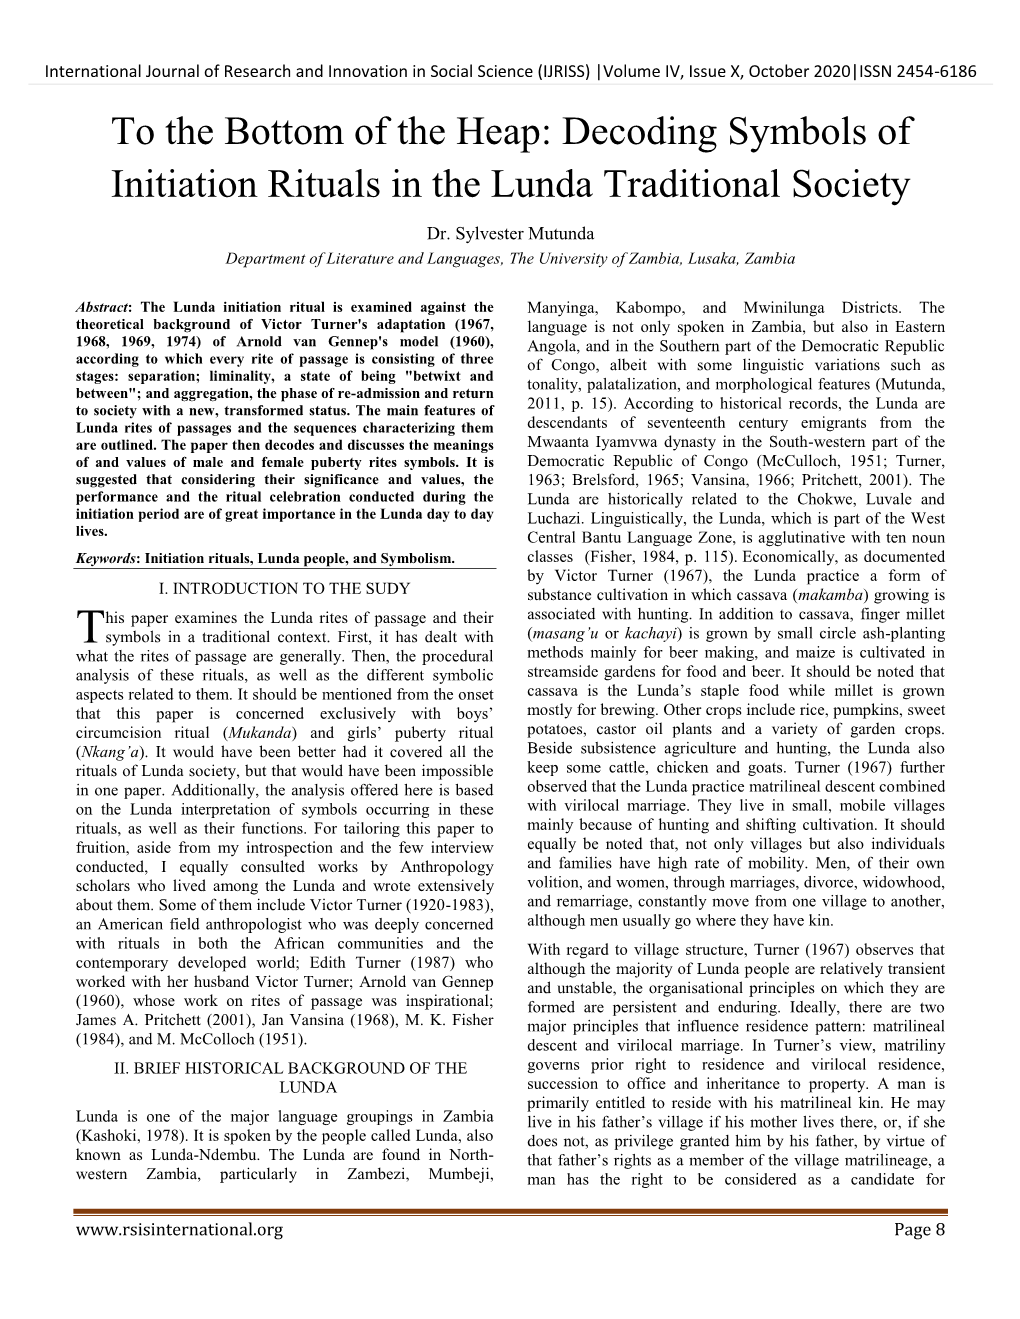 Decoding Symbols of Initiation Rituals in the Lunda Traditional Society